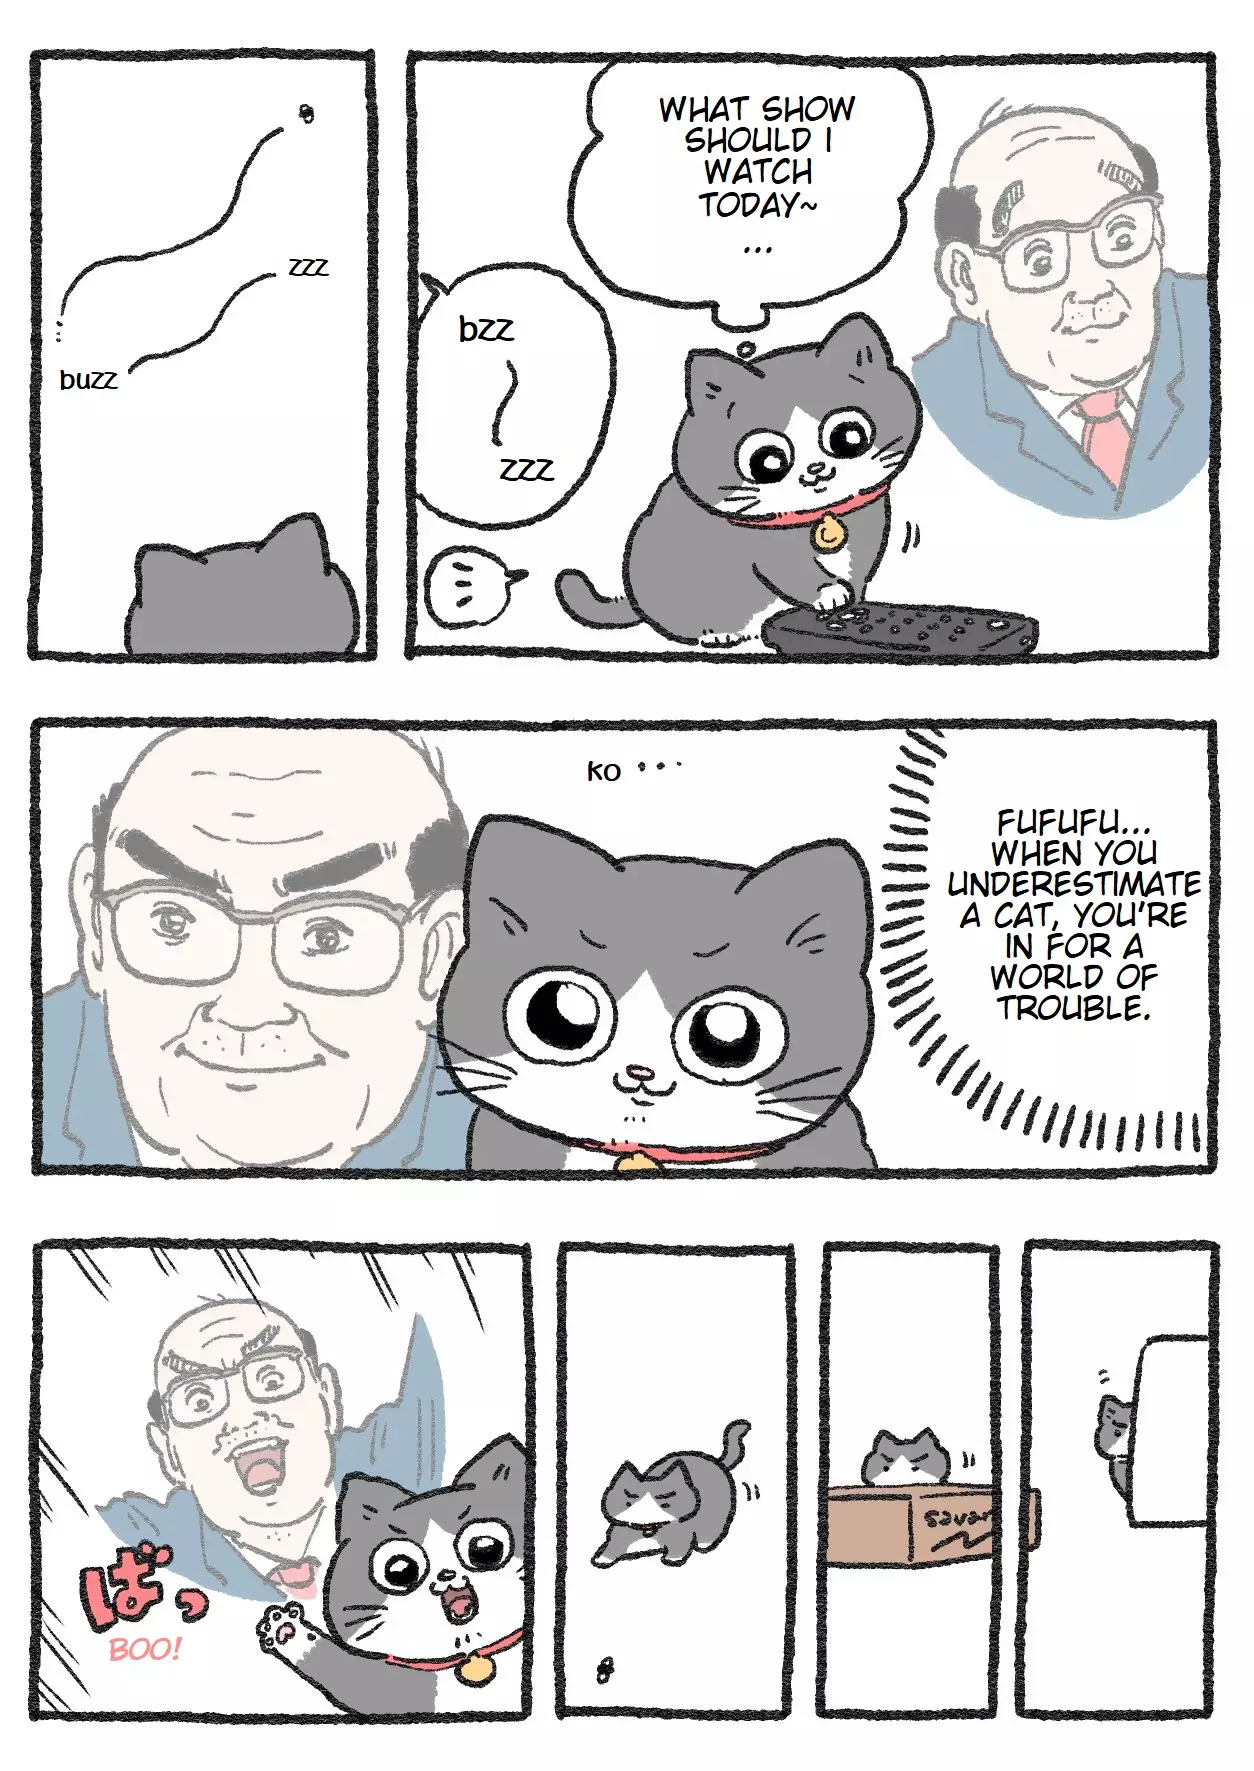 The Old Man Who Was Reincarnated As A Cat - 114 page 1-2755d1d5